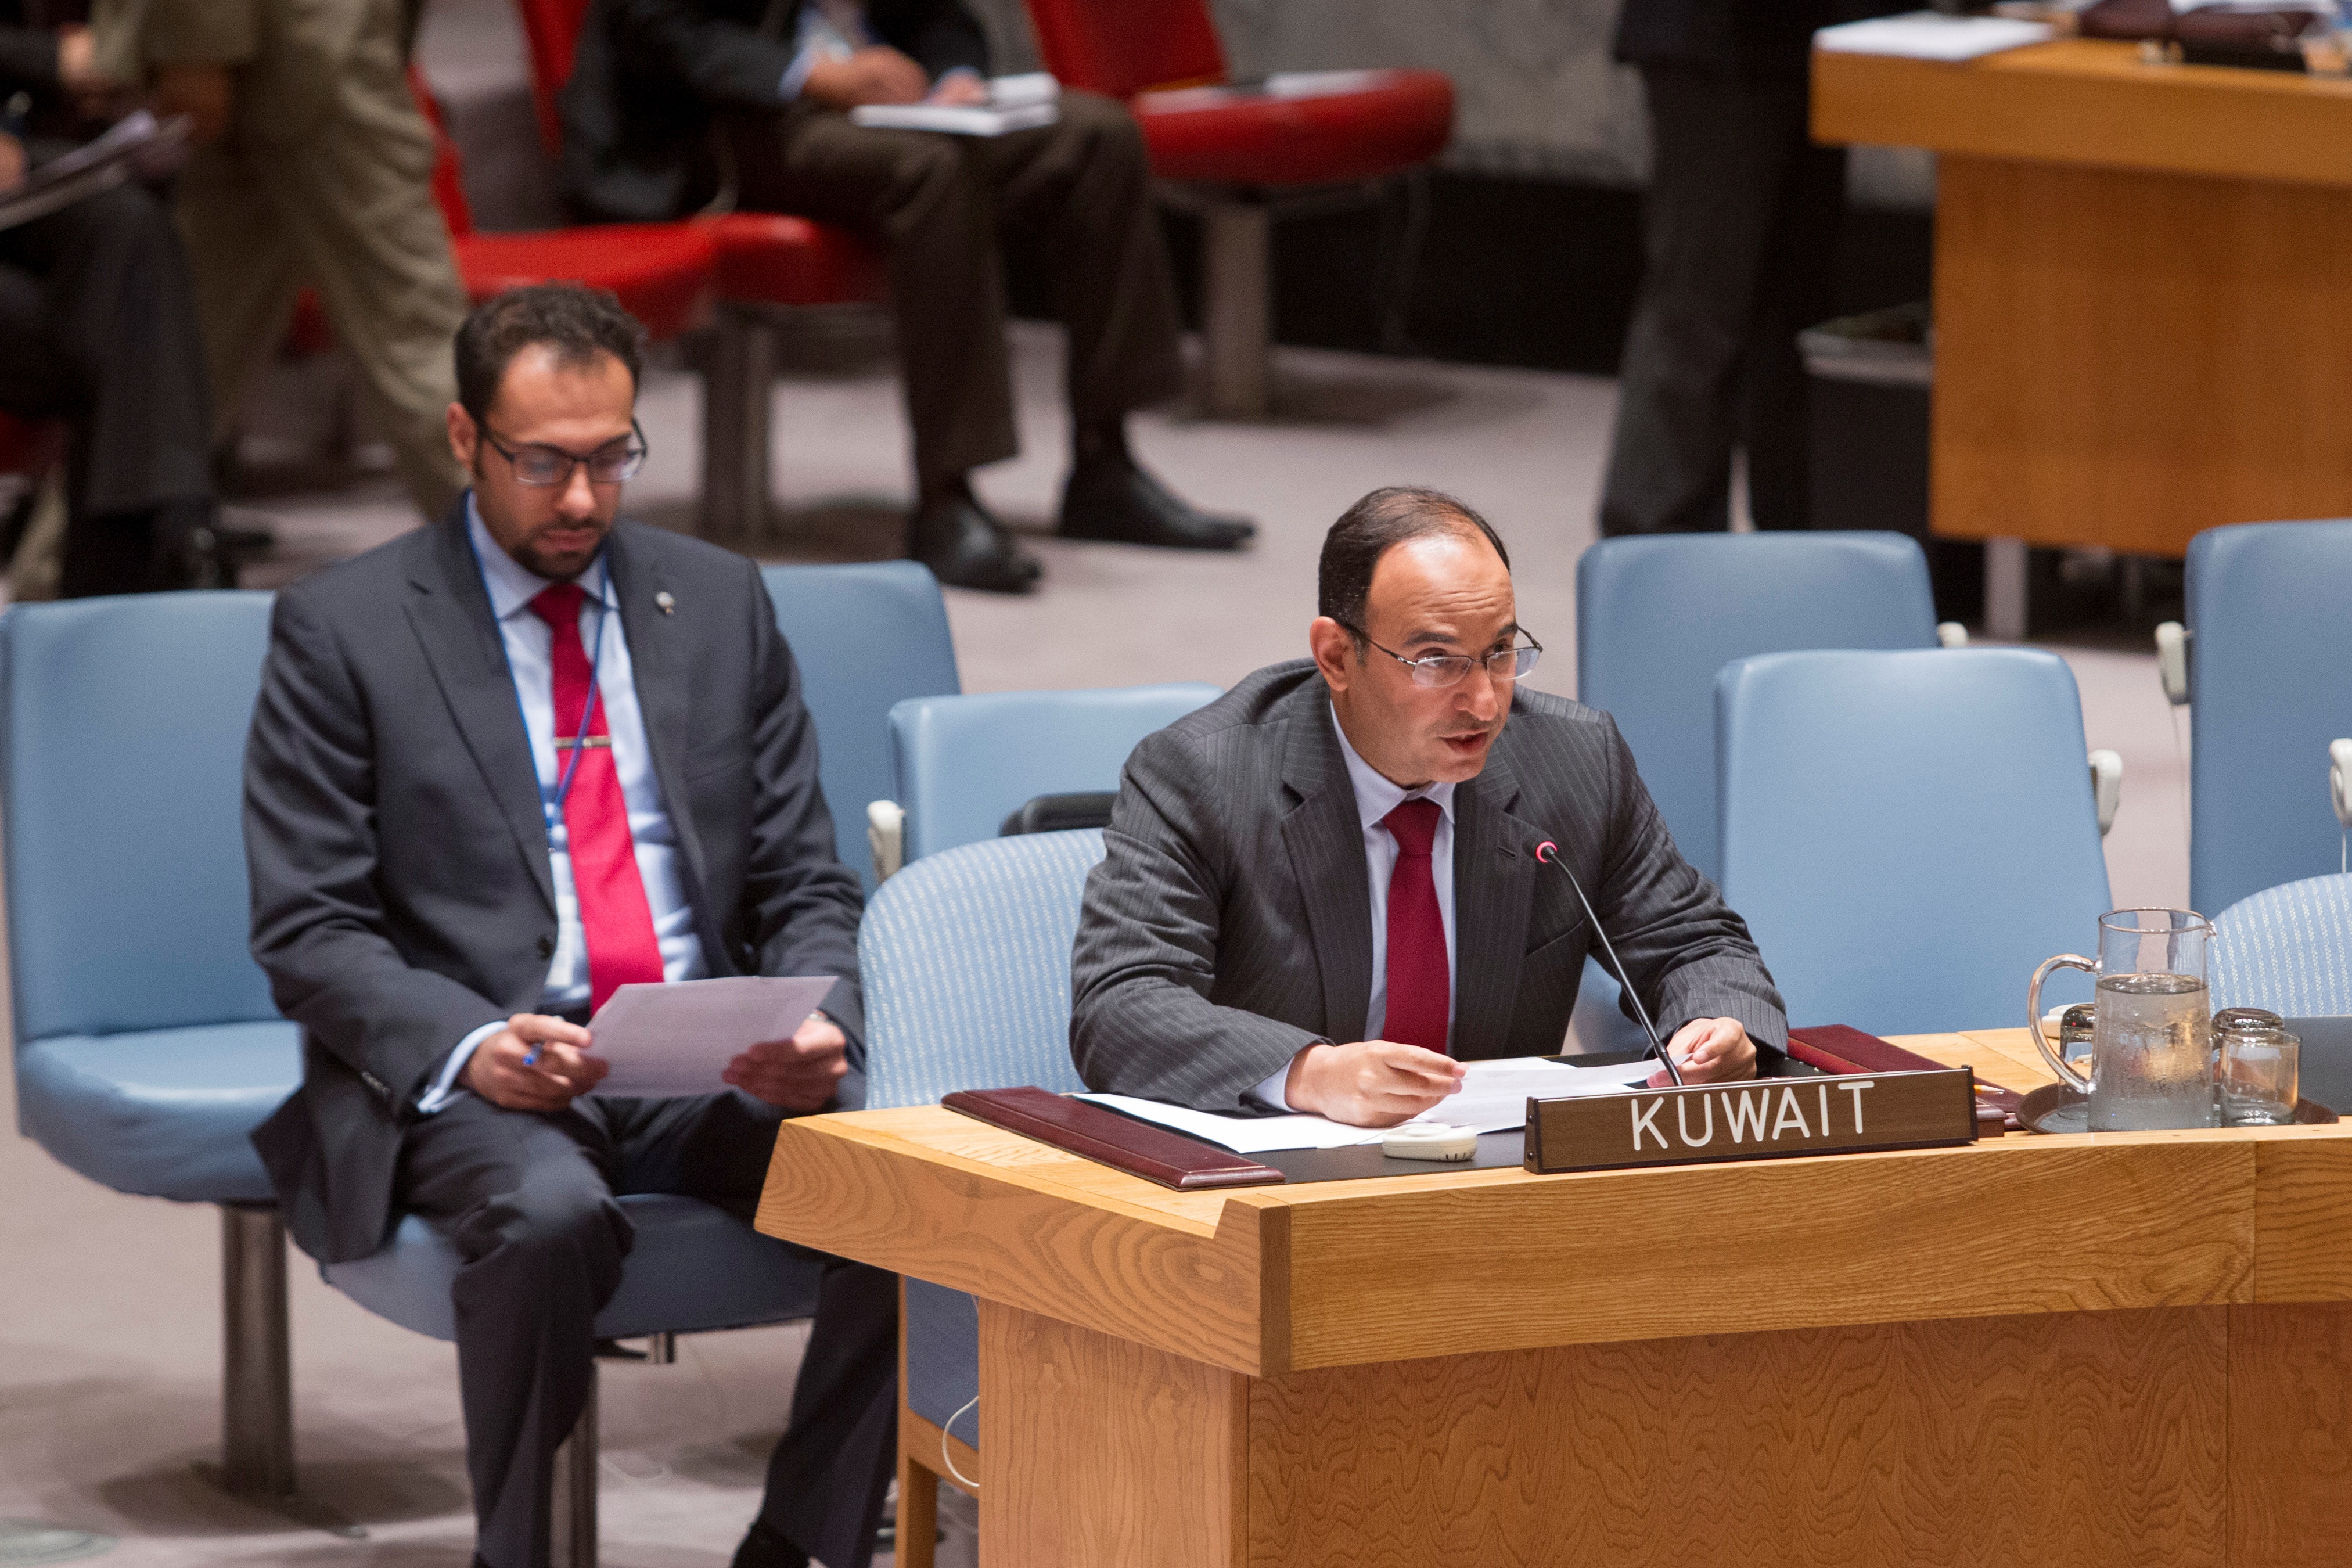 Ambassador Mansour Ayyad Al-Otaibi speaking at the Security Council open debate on "Regional Organization and Challenges of Global Security"